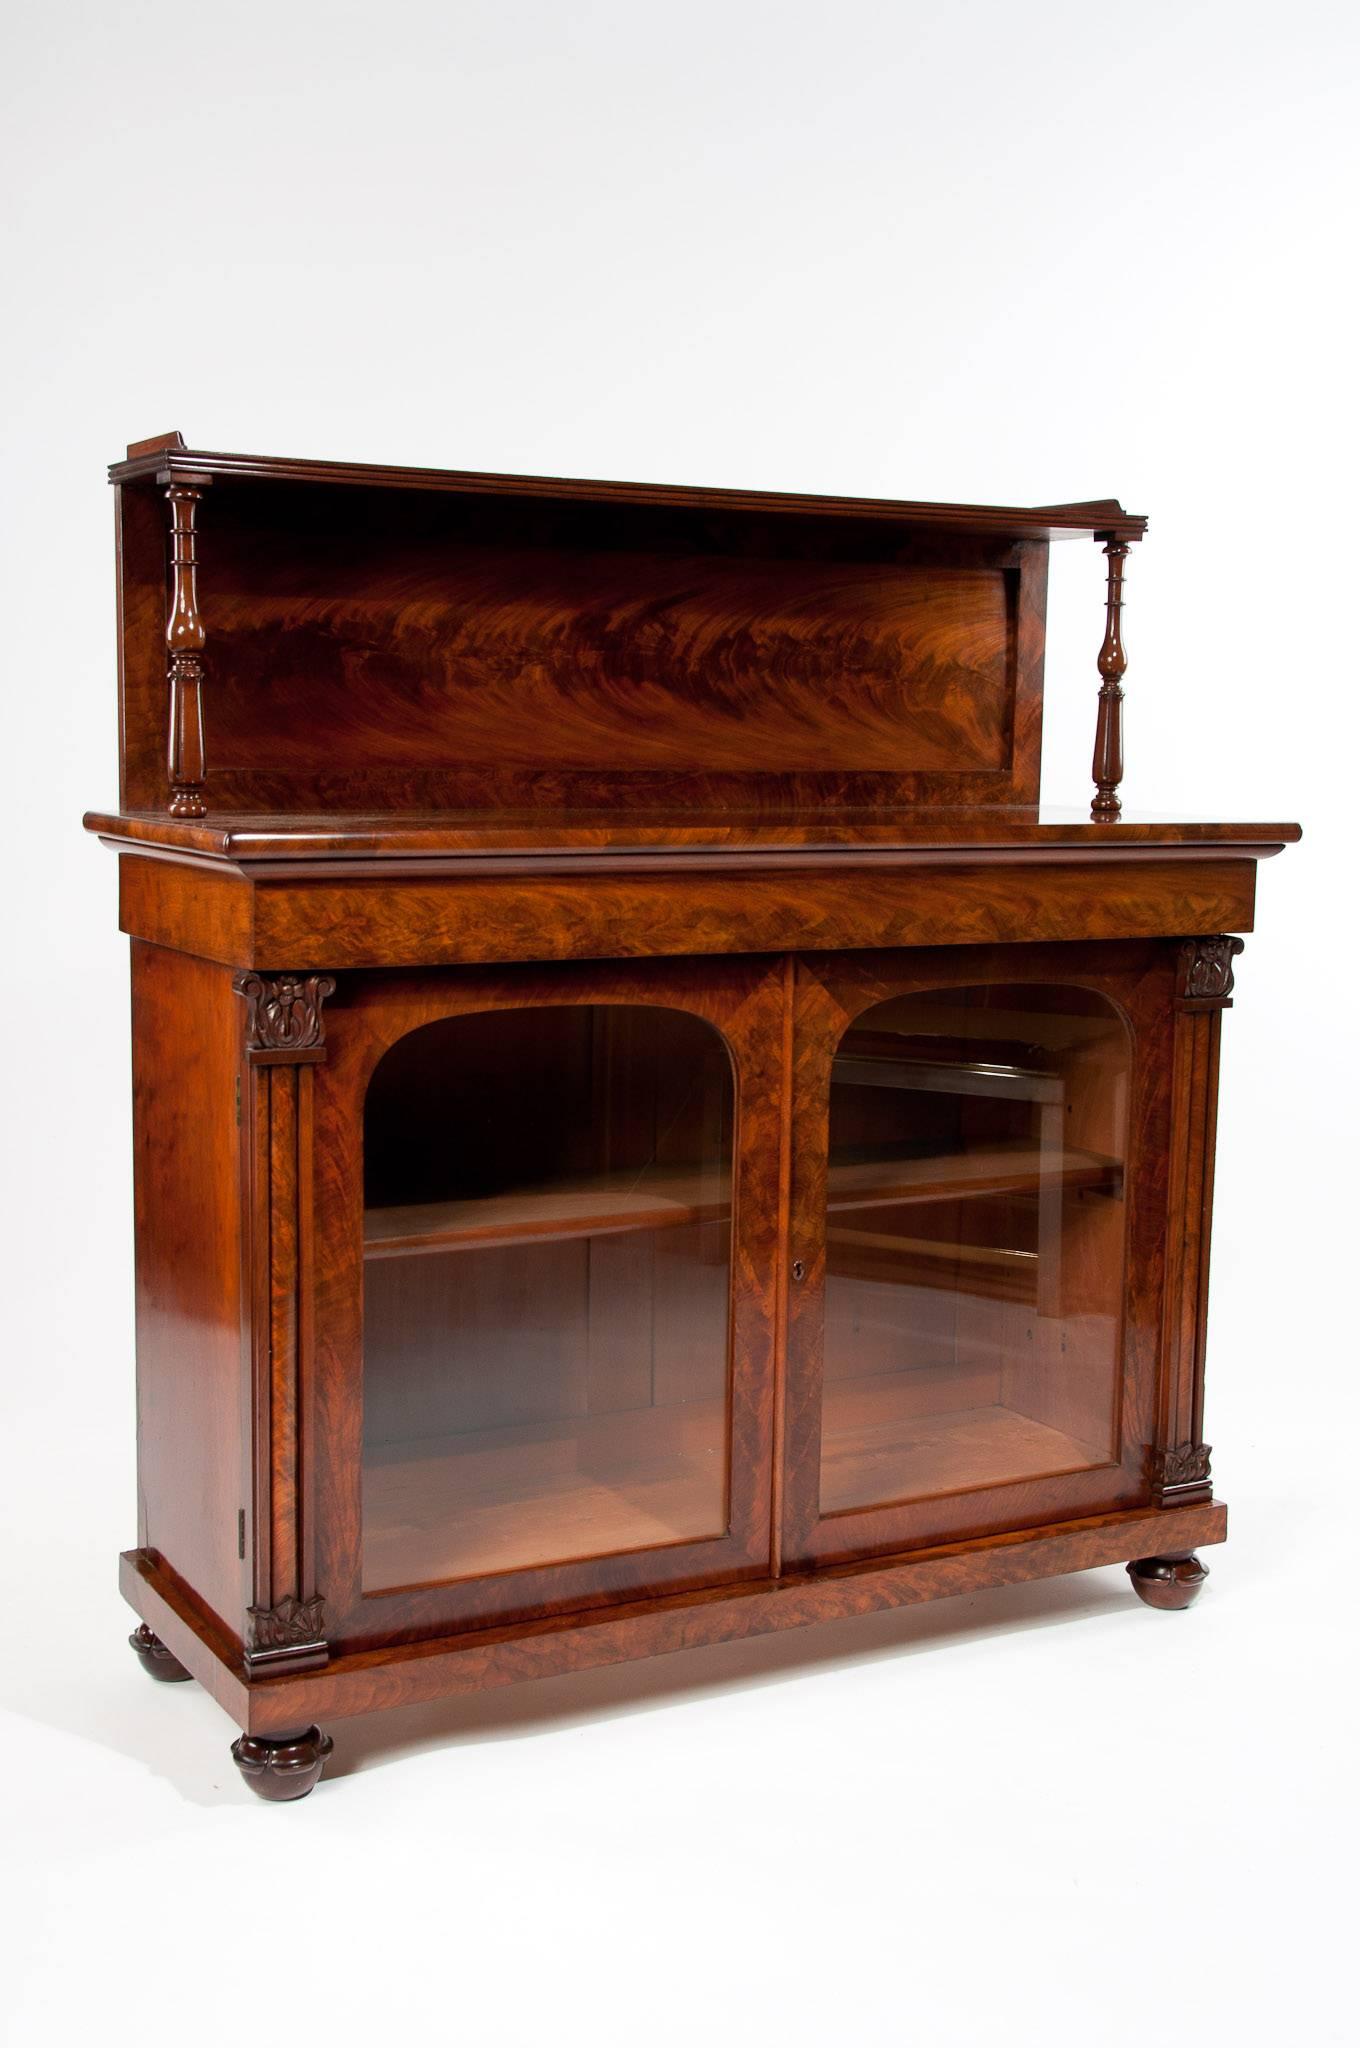 A superb quality William IV mahogany two door chiffonier. This chiffonier dating to, circa 1835 has been constructed to the finest quality with stunning flame mahogany veneers having a raised tier with central panelled back supported by turned